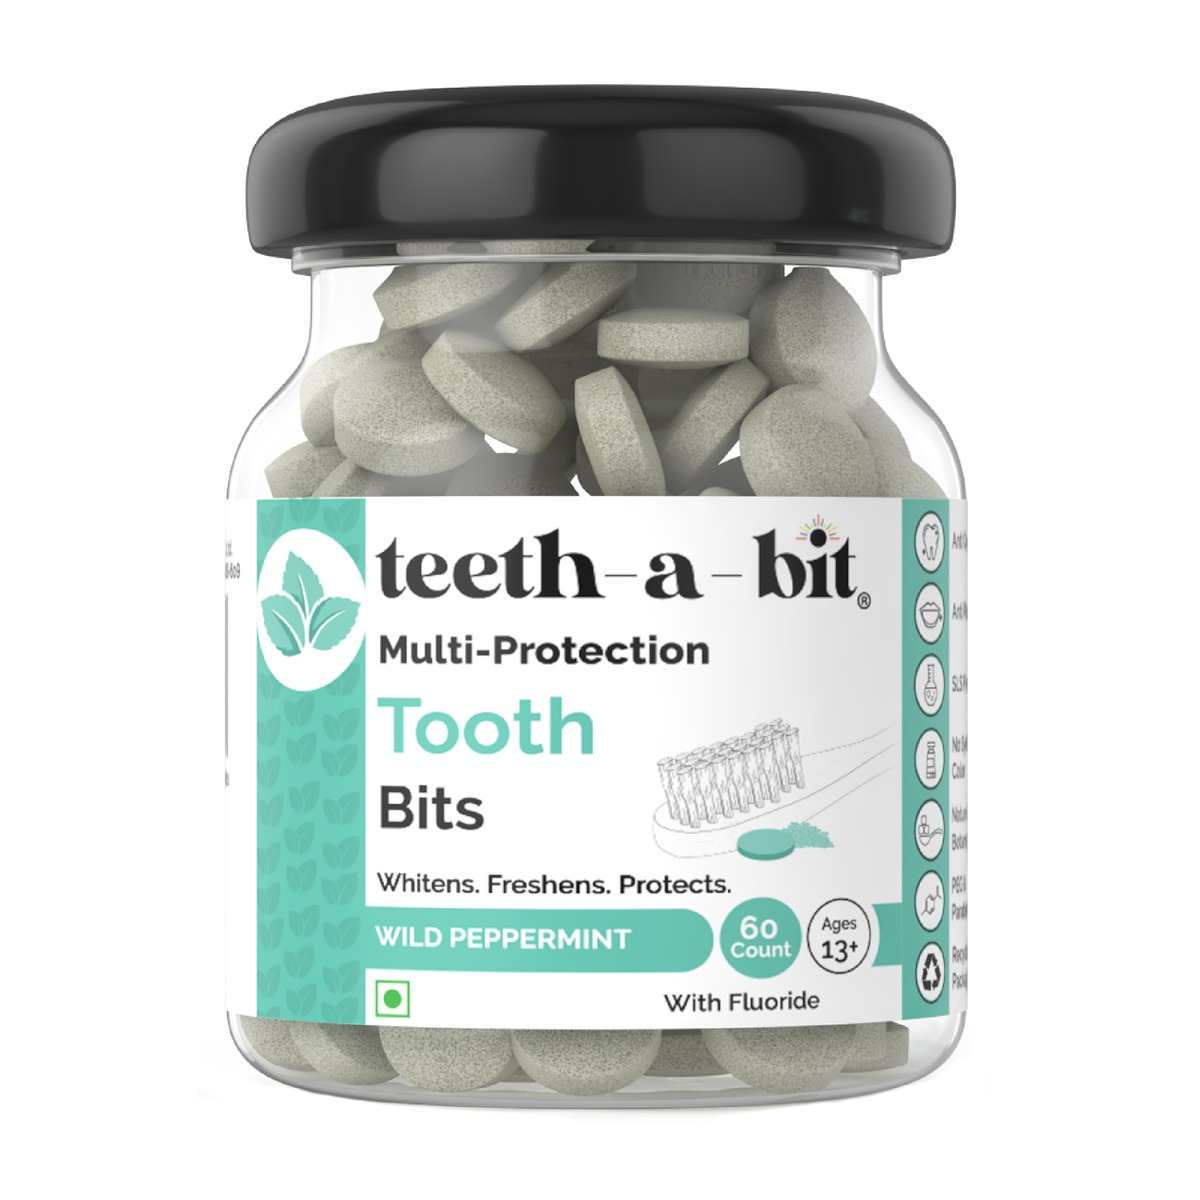 teeth-a-bit Multi-Protection Wild Peppermint Tooth Bits, 60 Count